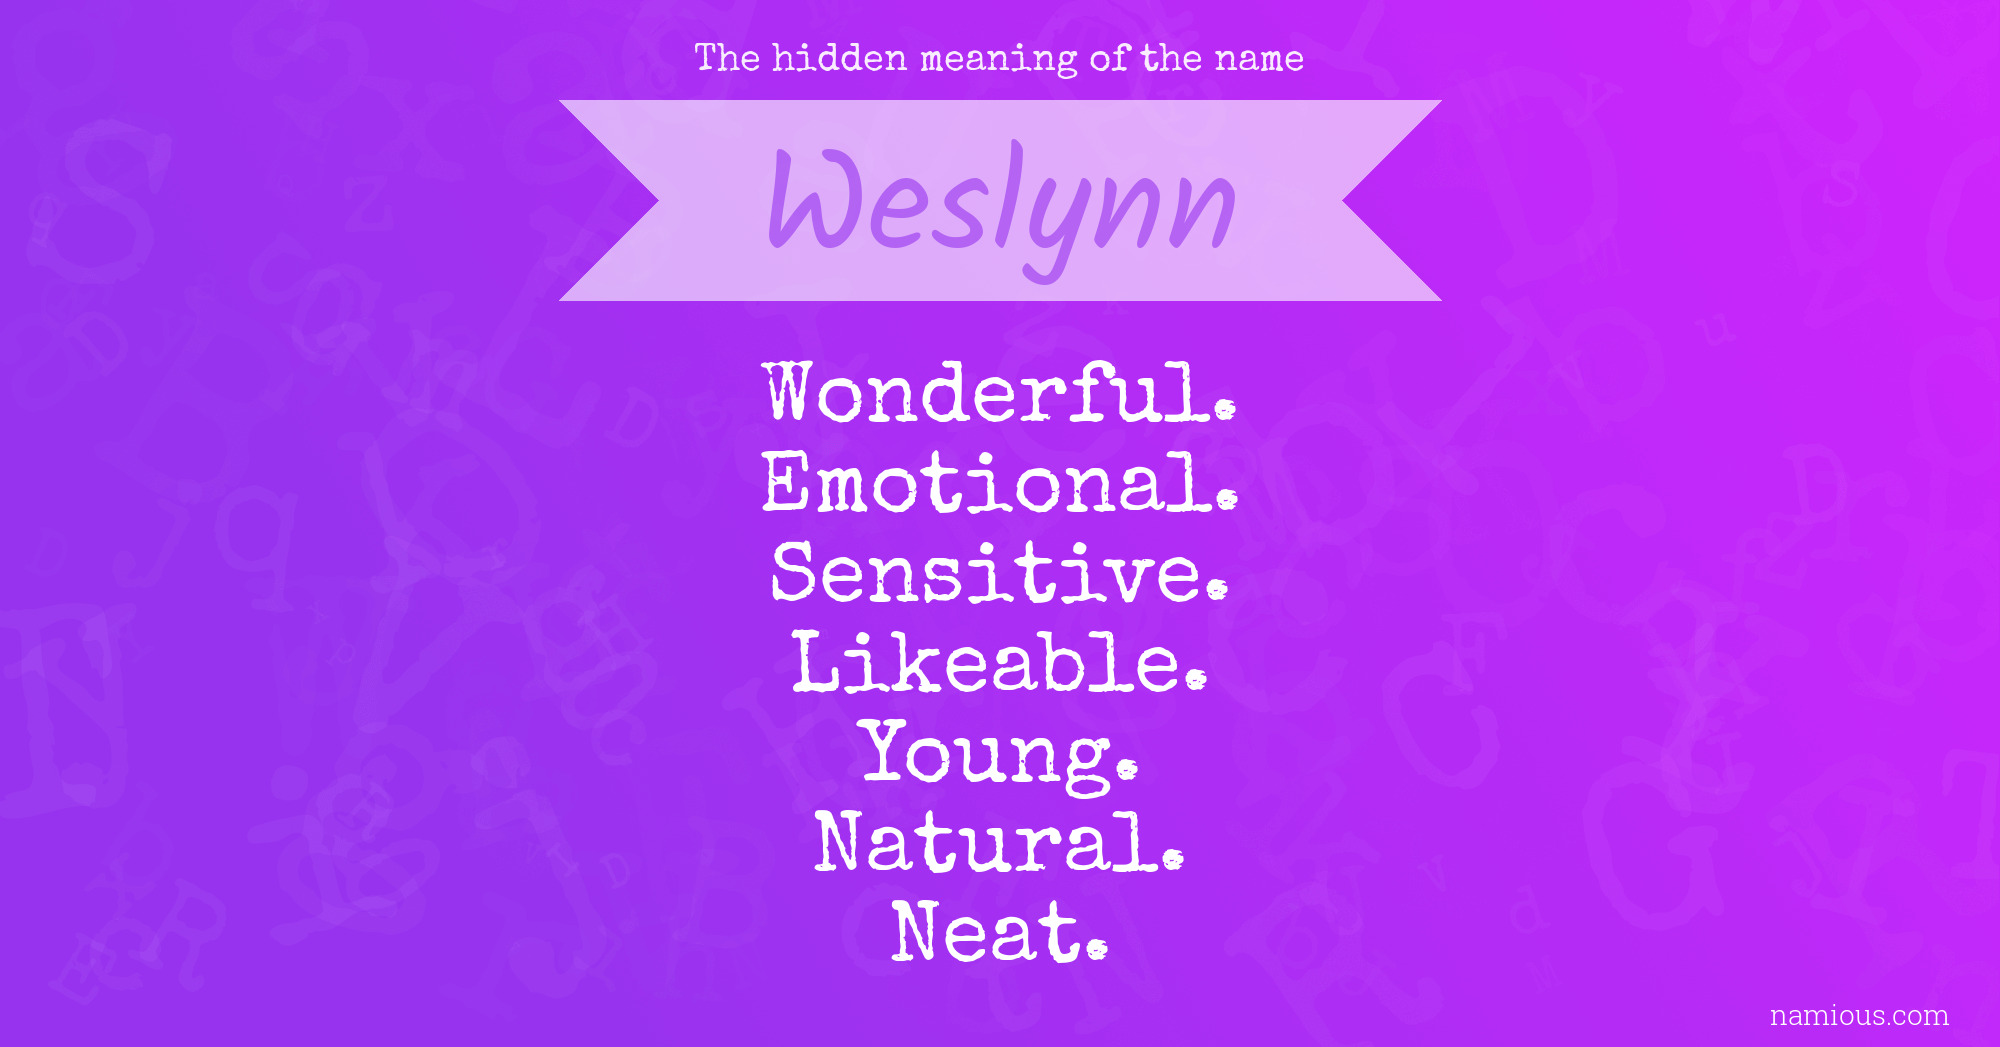 The hidden meaning of the name Weslynn